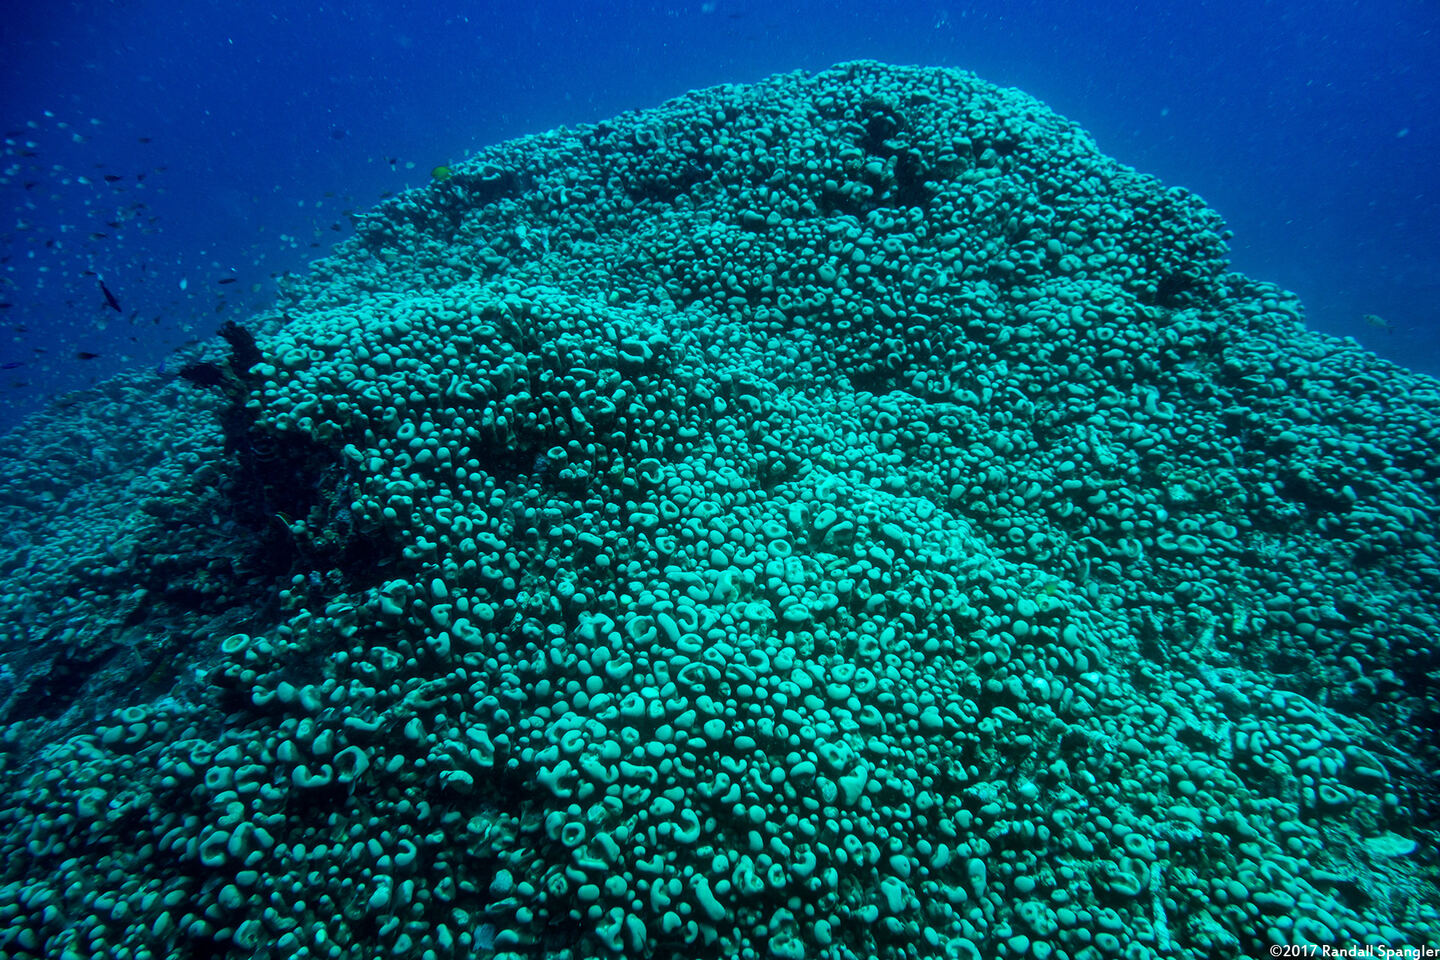 Pavona clavus (Swollen Coral); This coral is the size of a house